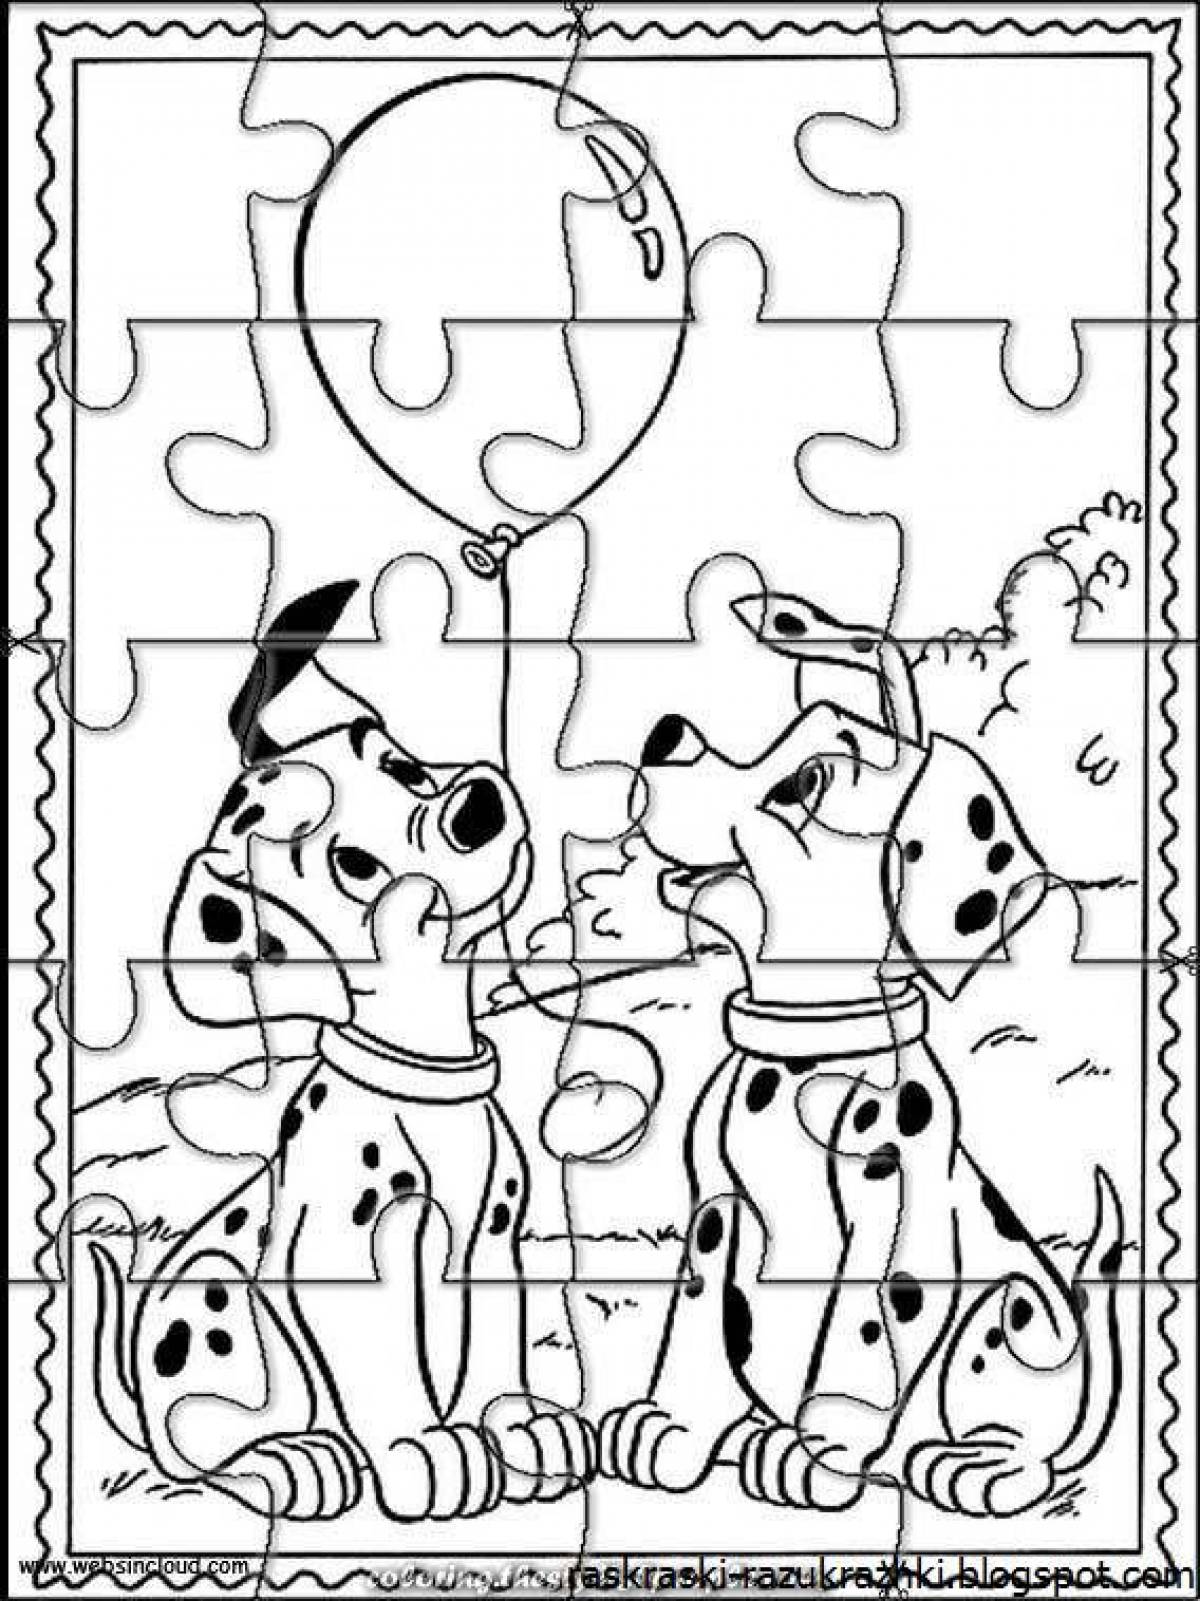 Intriguing puzzle coloring book